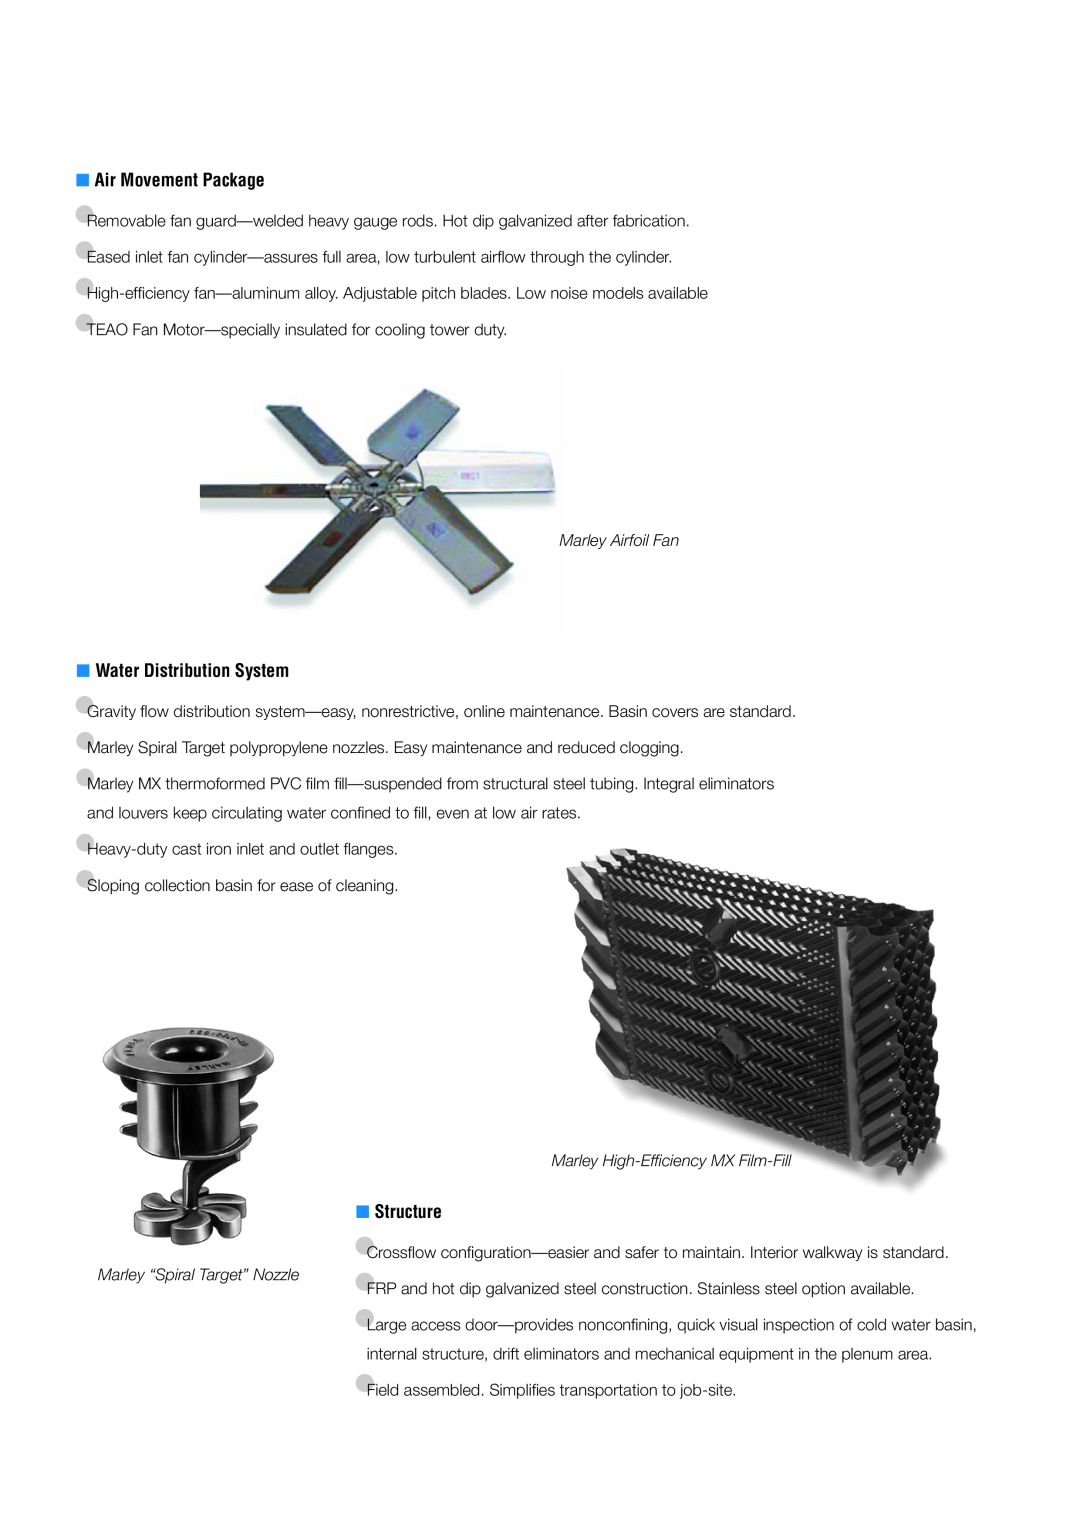 SPX Cooling Technologies Marley NC Fiberglass manual Air Movement Package, Water Distribution System, Structure 